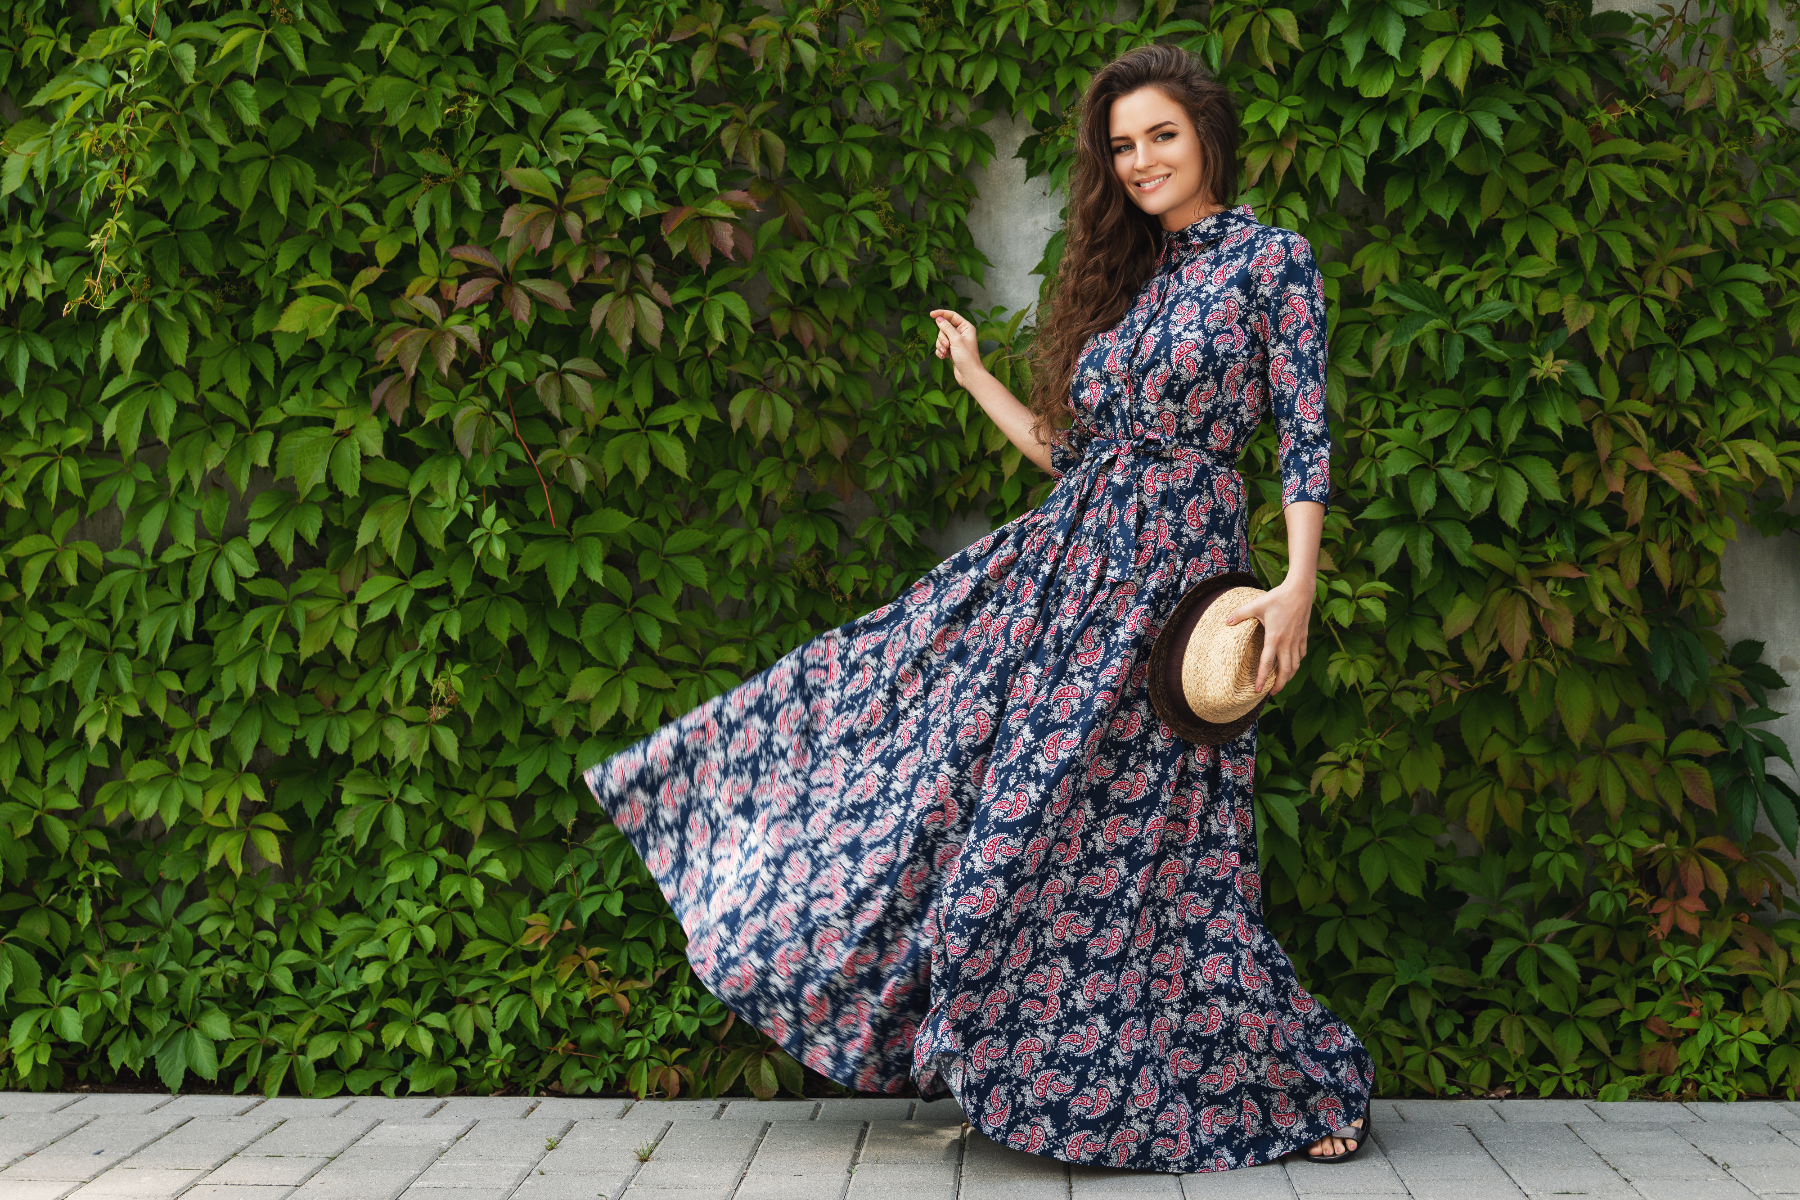 A gorgeous woman wearing a beautiful maxi dress poses against the wall with a wild grape